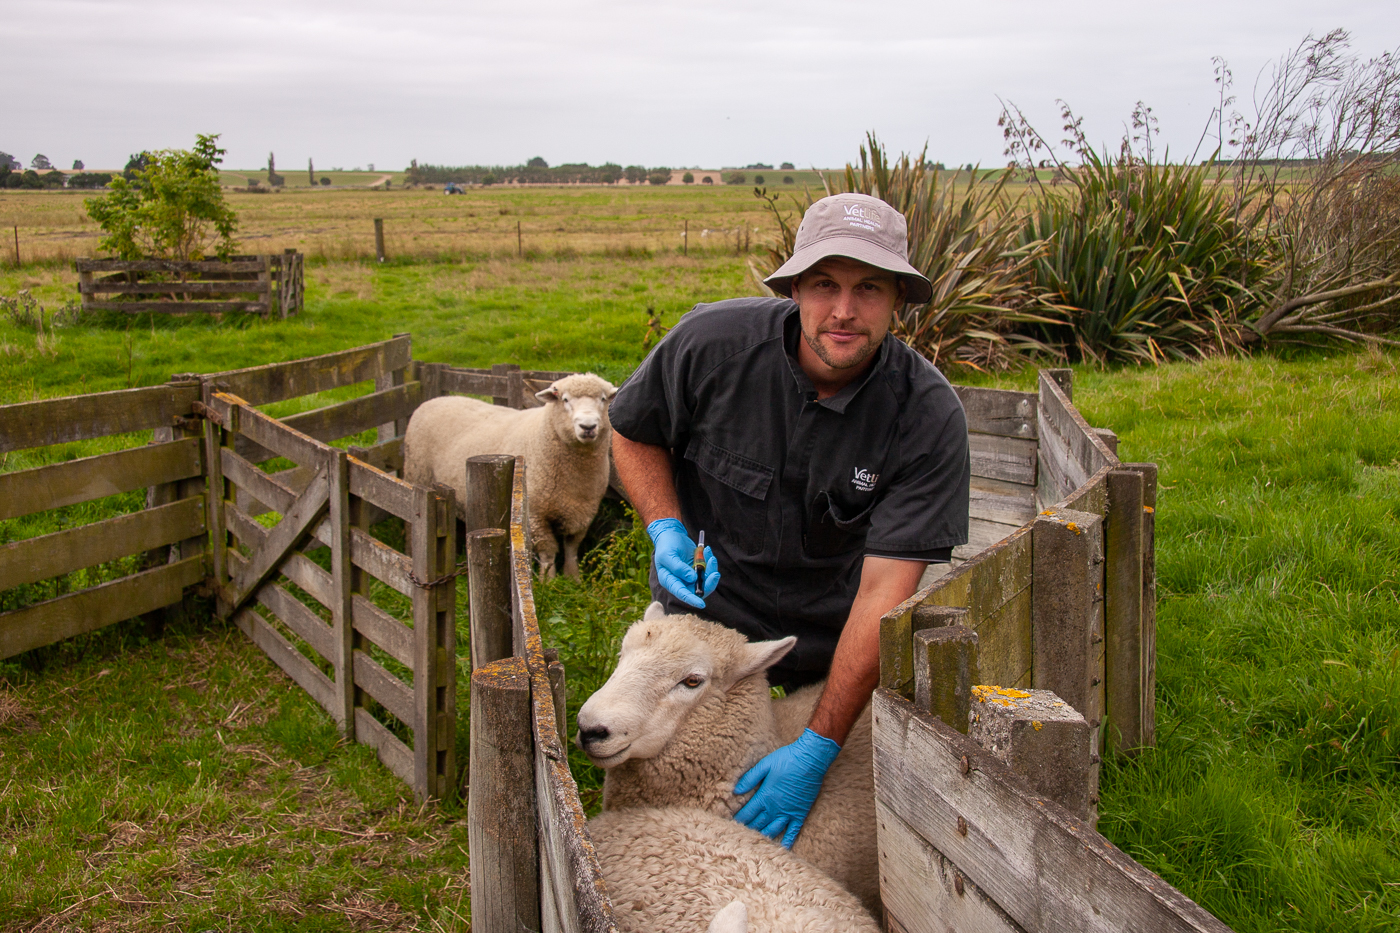 Vetlife vet tech working with sheep